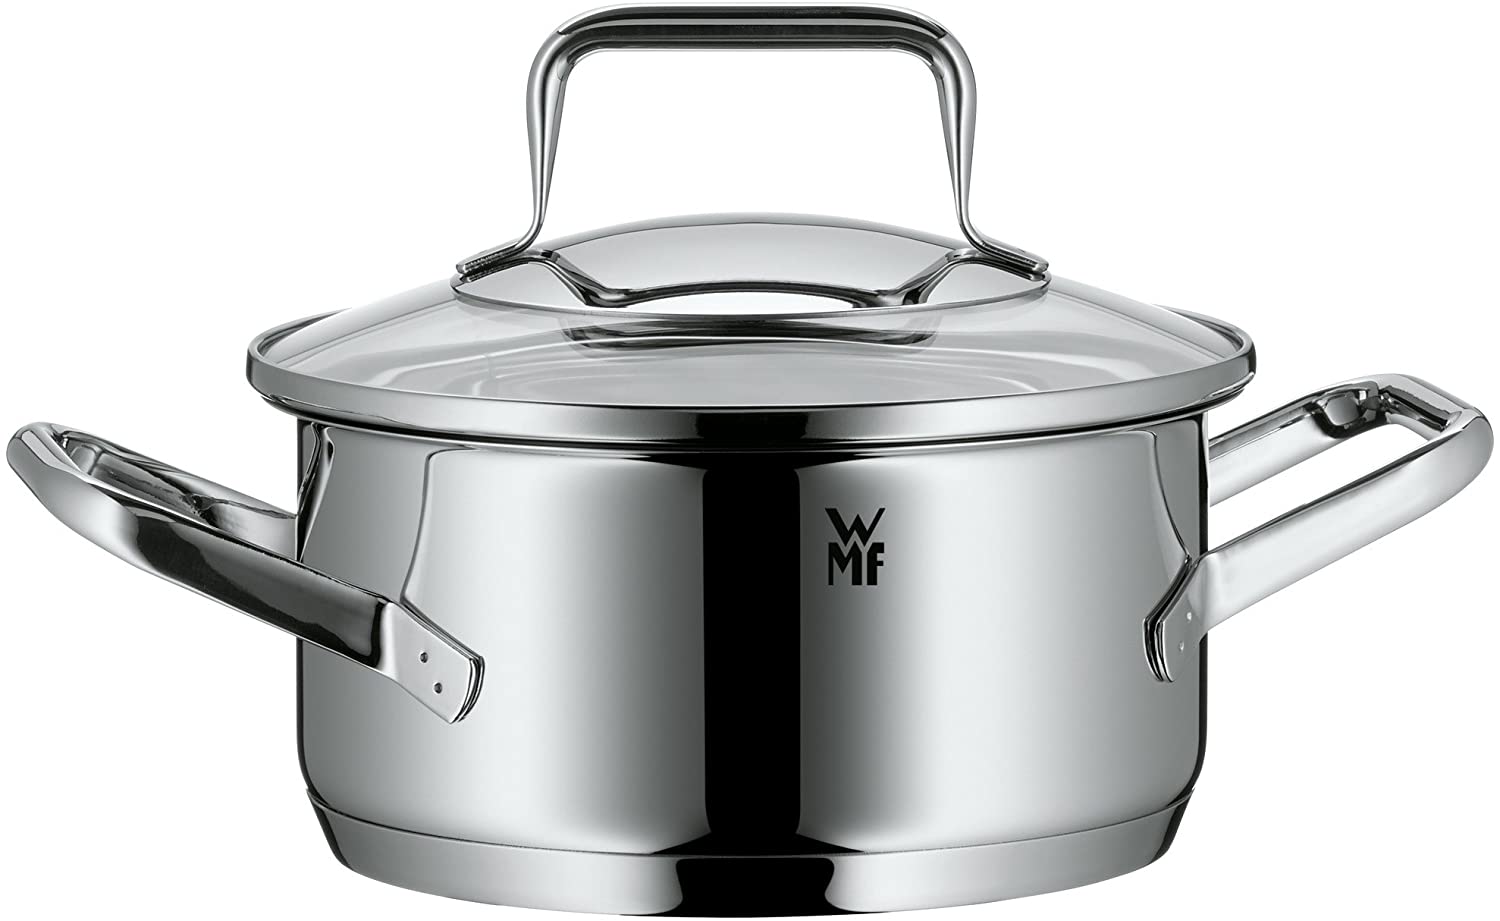 WMF 16 cm Stainless Steel Trend Low Casserole with Lid